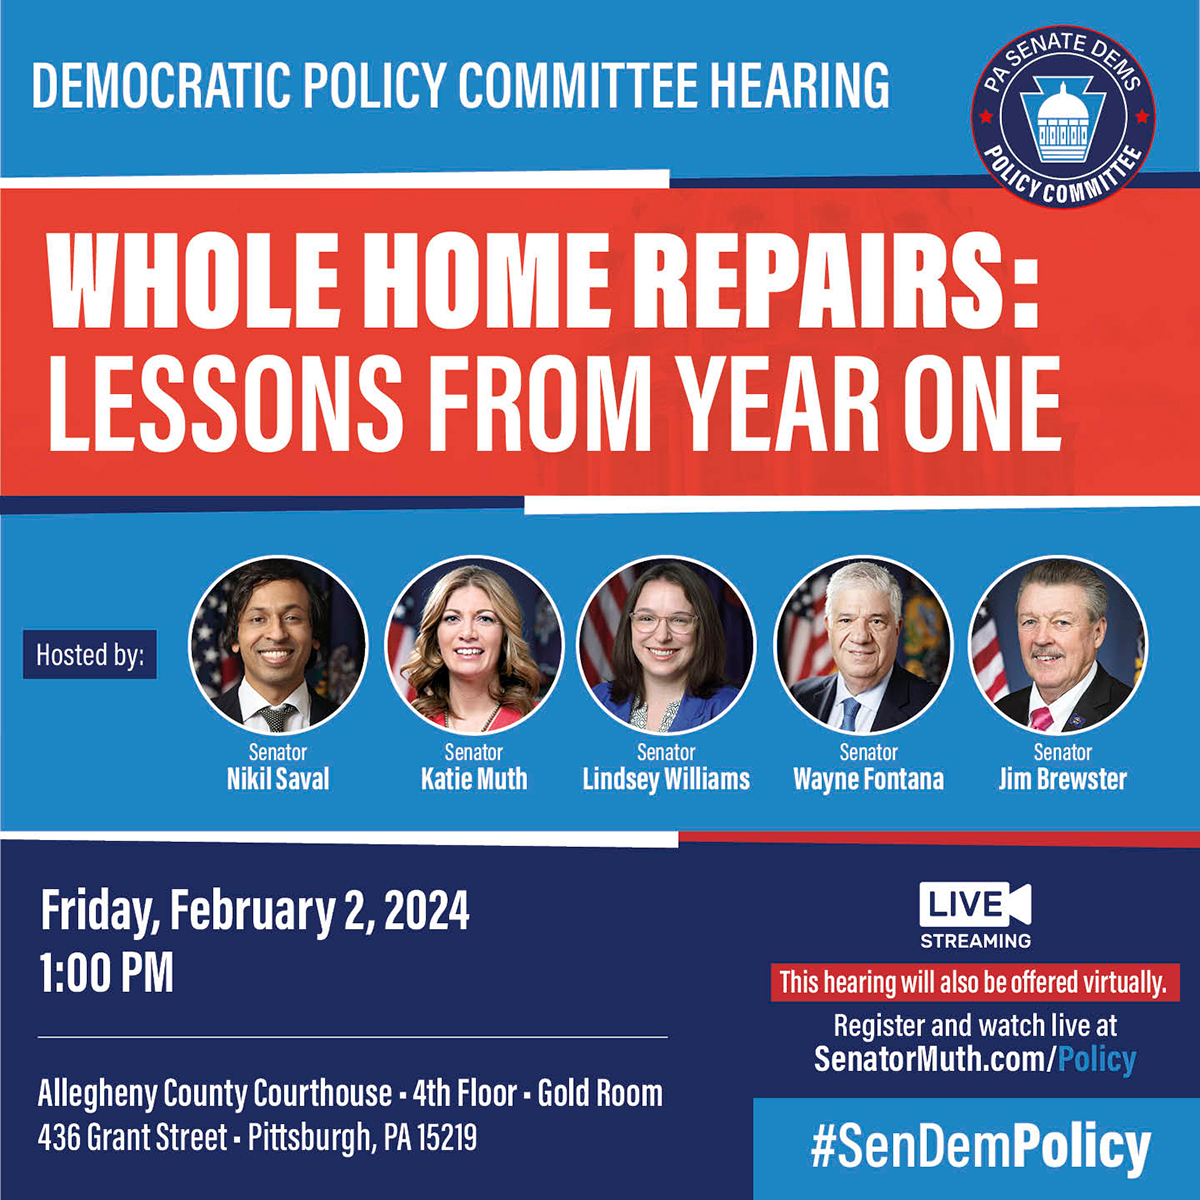 Whole-Home Repairs Program Policy Hearing